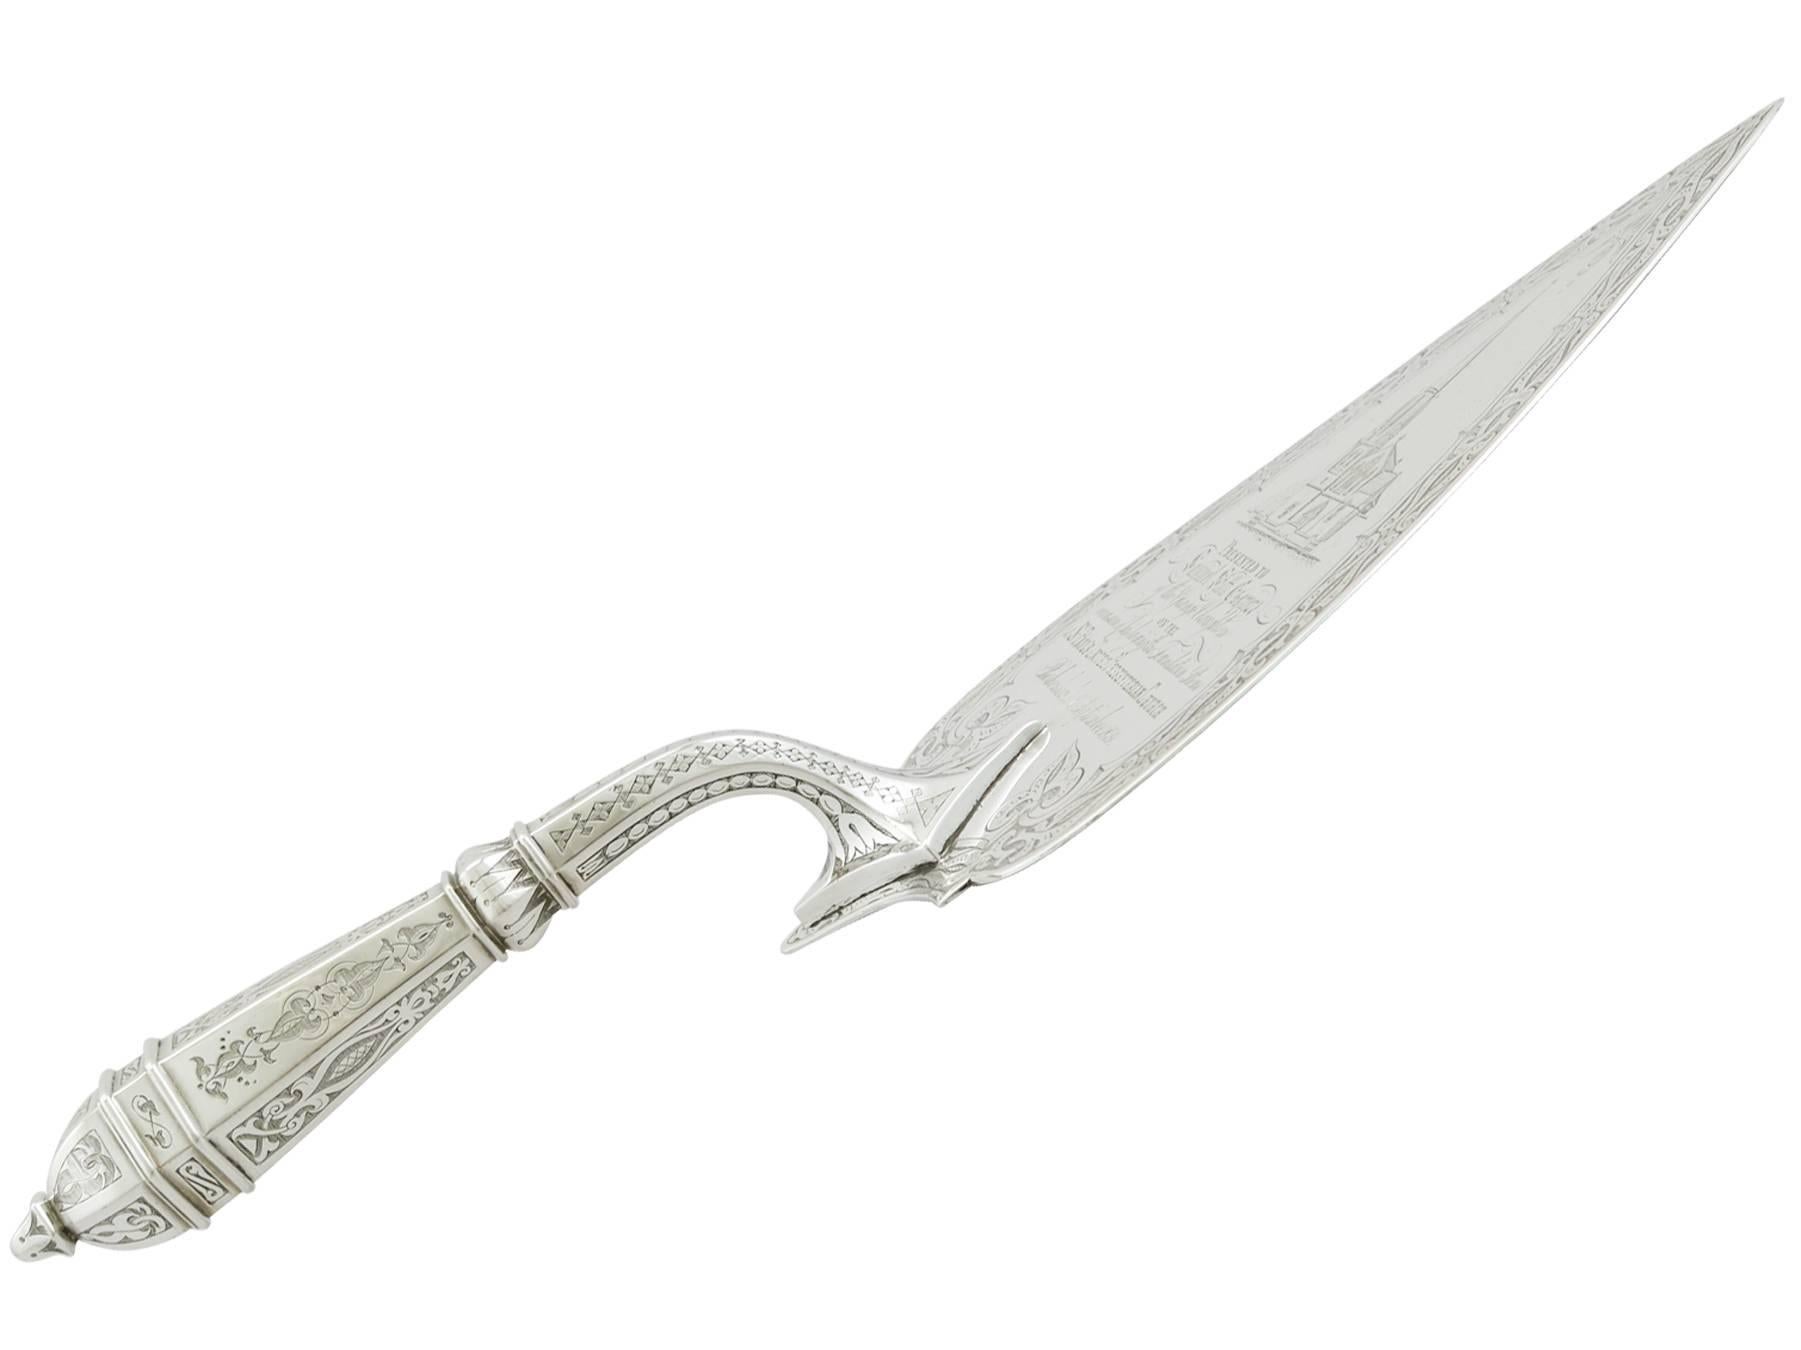 An exceptional, fine and impressive antique Victorian English sterling silver presentation trowel; an addition to our diverse silverware collection.

This exceptional antique Victorian sterling silver presentation trowel has a rounded triangle